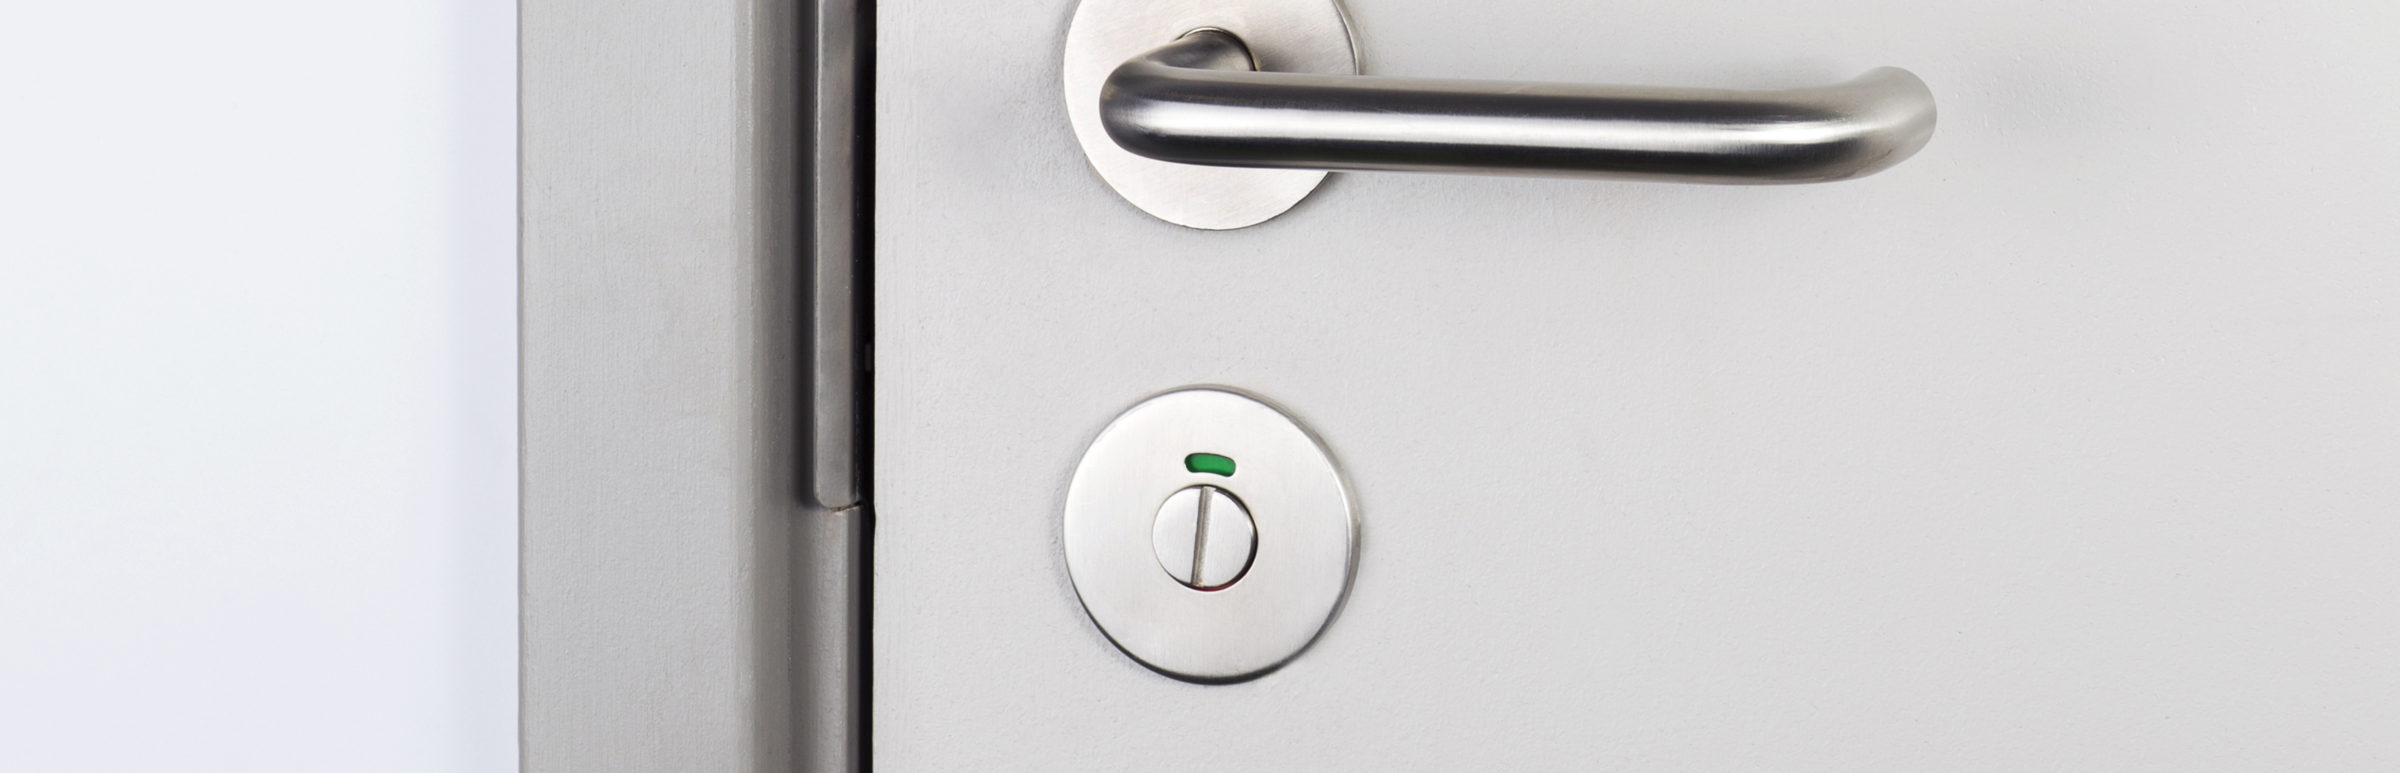 Accessible Thumb Turn and Emergency Release Lock